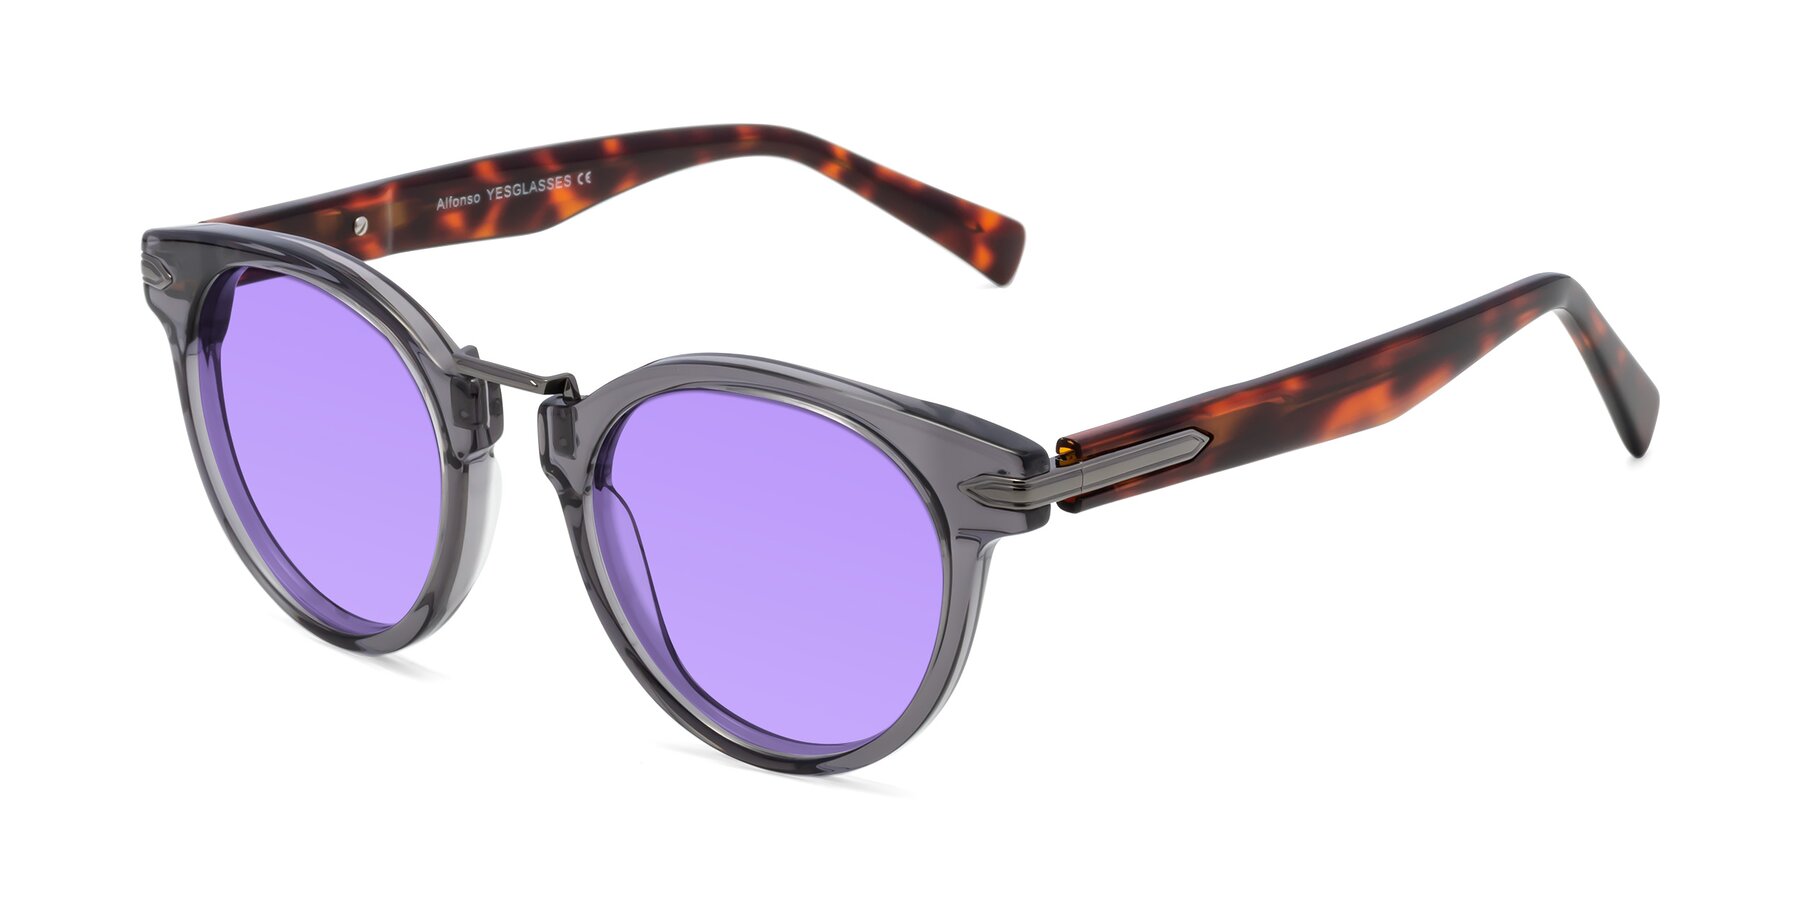 Angle of Alfonso in Gray /Tortoise with Medium Purple Tinted Lenses